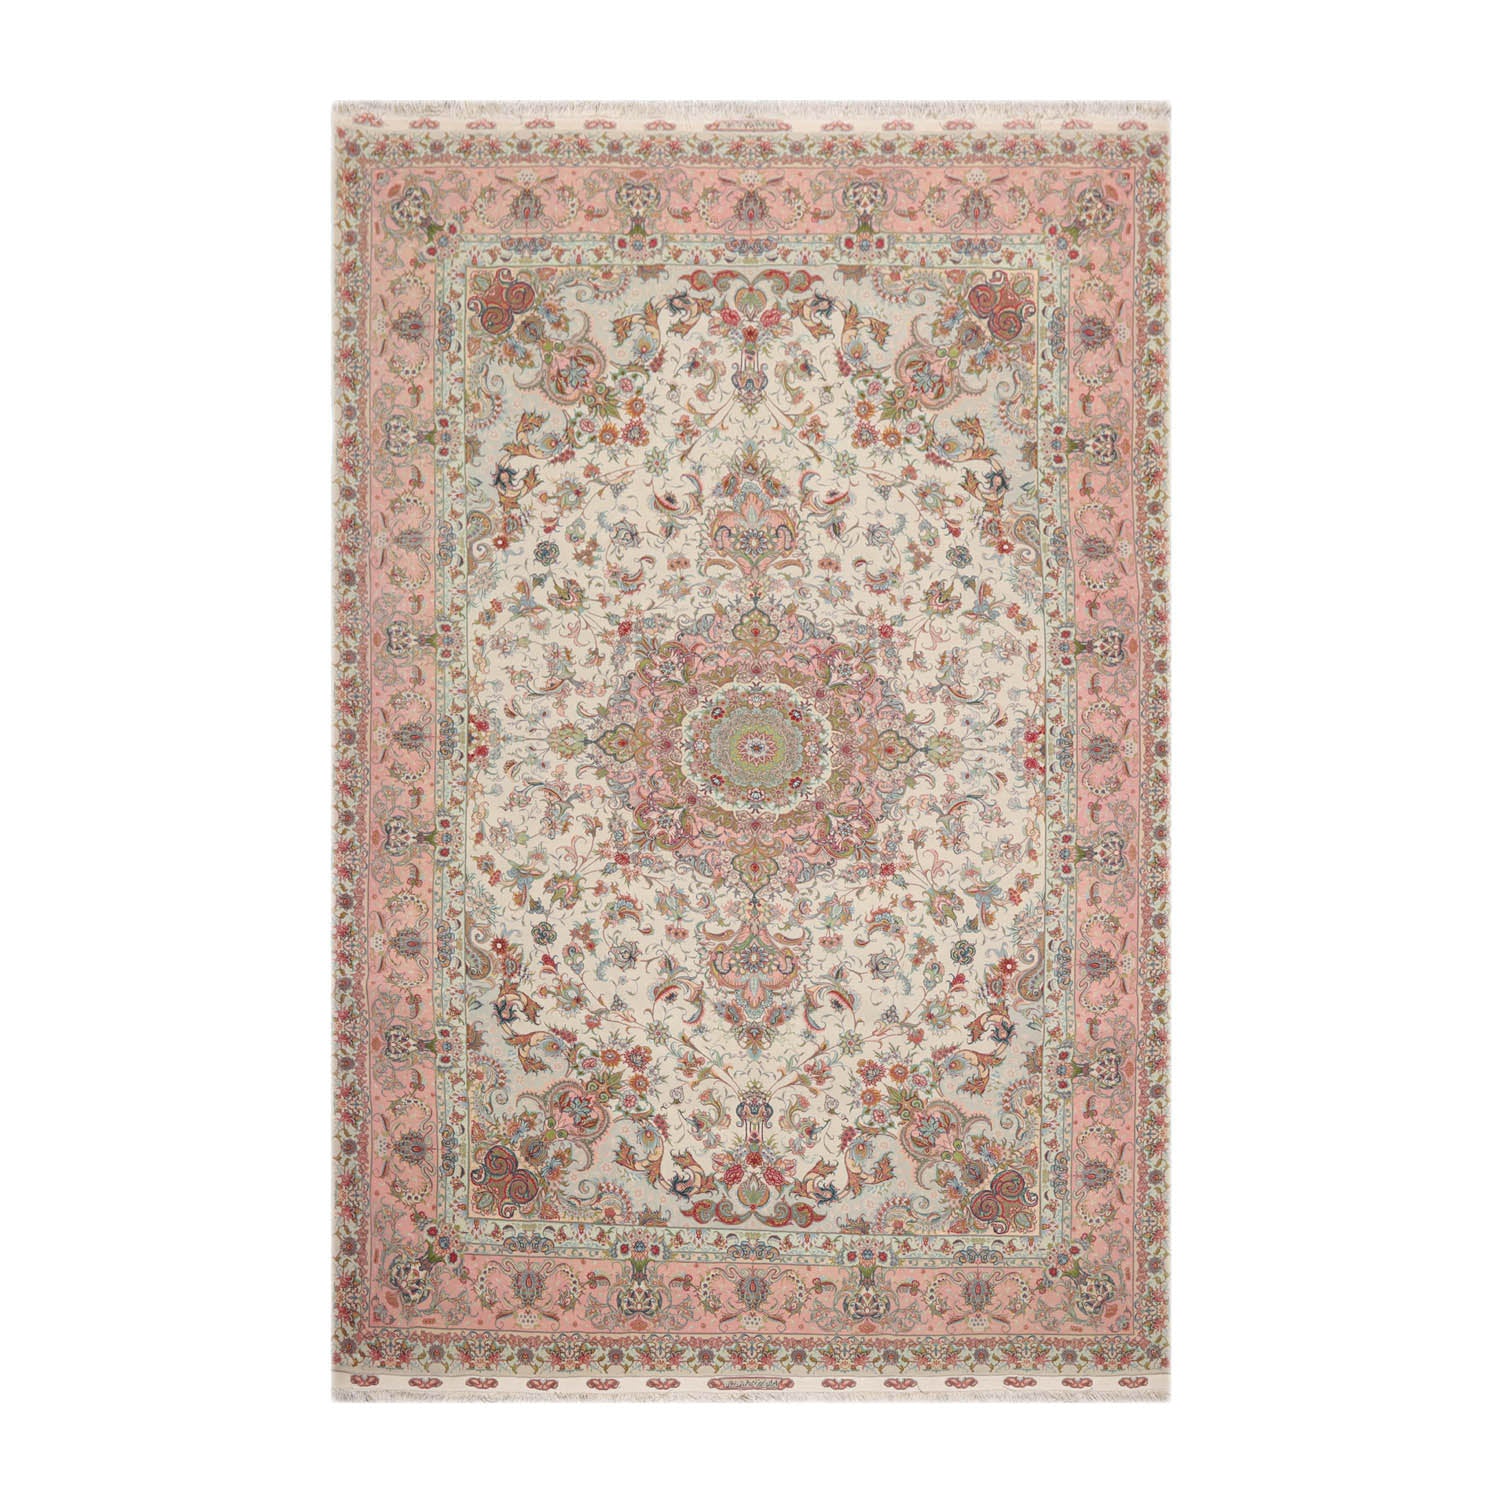 Victoria 6x9 Hand Knotted Wool and Silk Traditional Tabriz Master Weaver Signed 400 KPSI Oriental Area Rug Ivory, Blush Color